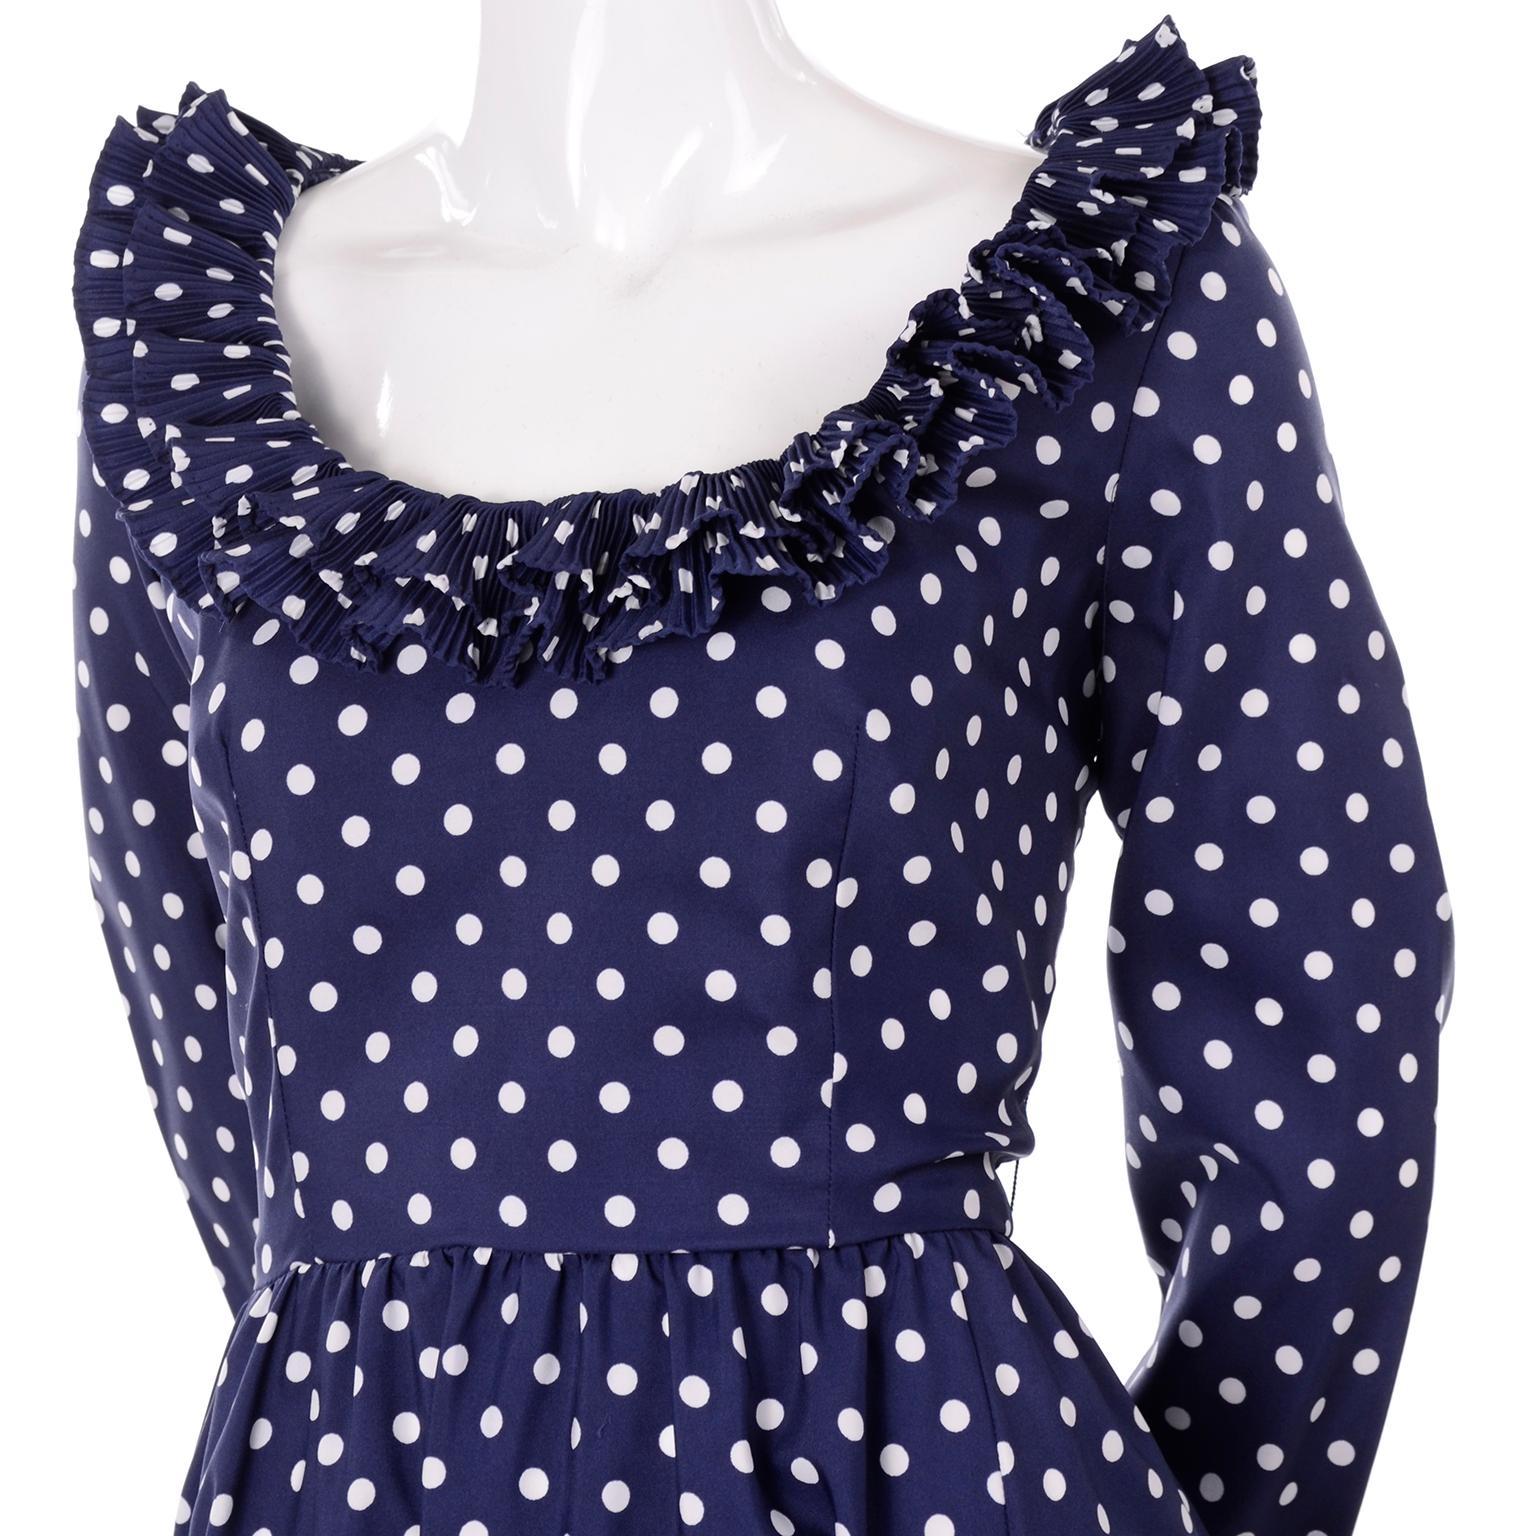 1970s Victor Costa Navy Blue & White Polka Dot Vintage Dress With Ruffles In Excellent Condition For Sale In Portland, OR